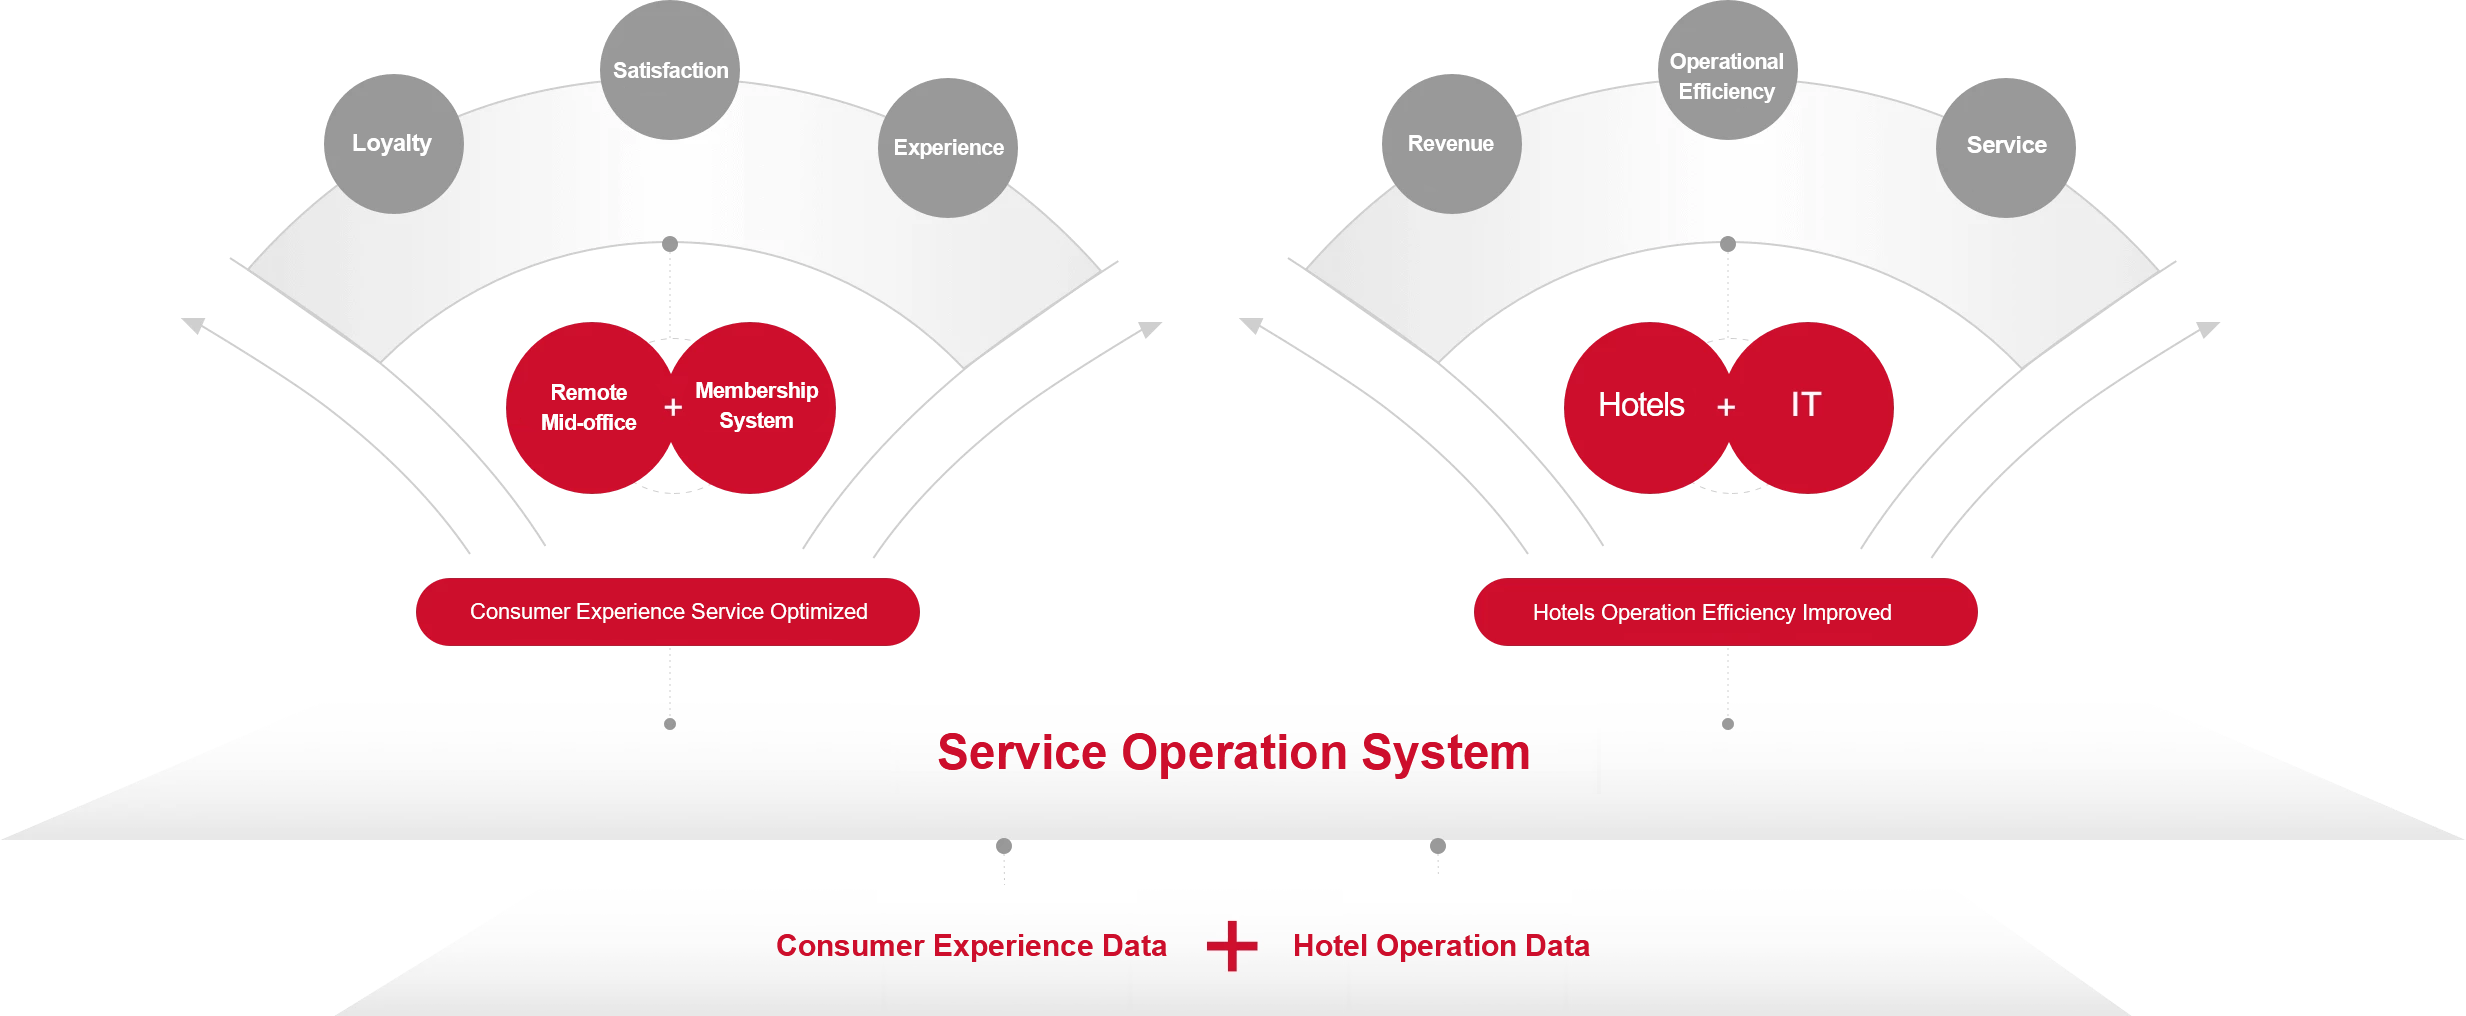 Core Competence 3: Service Operation System Via An IT-driven Mid-office